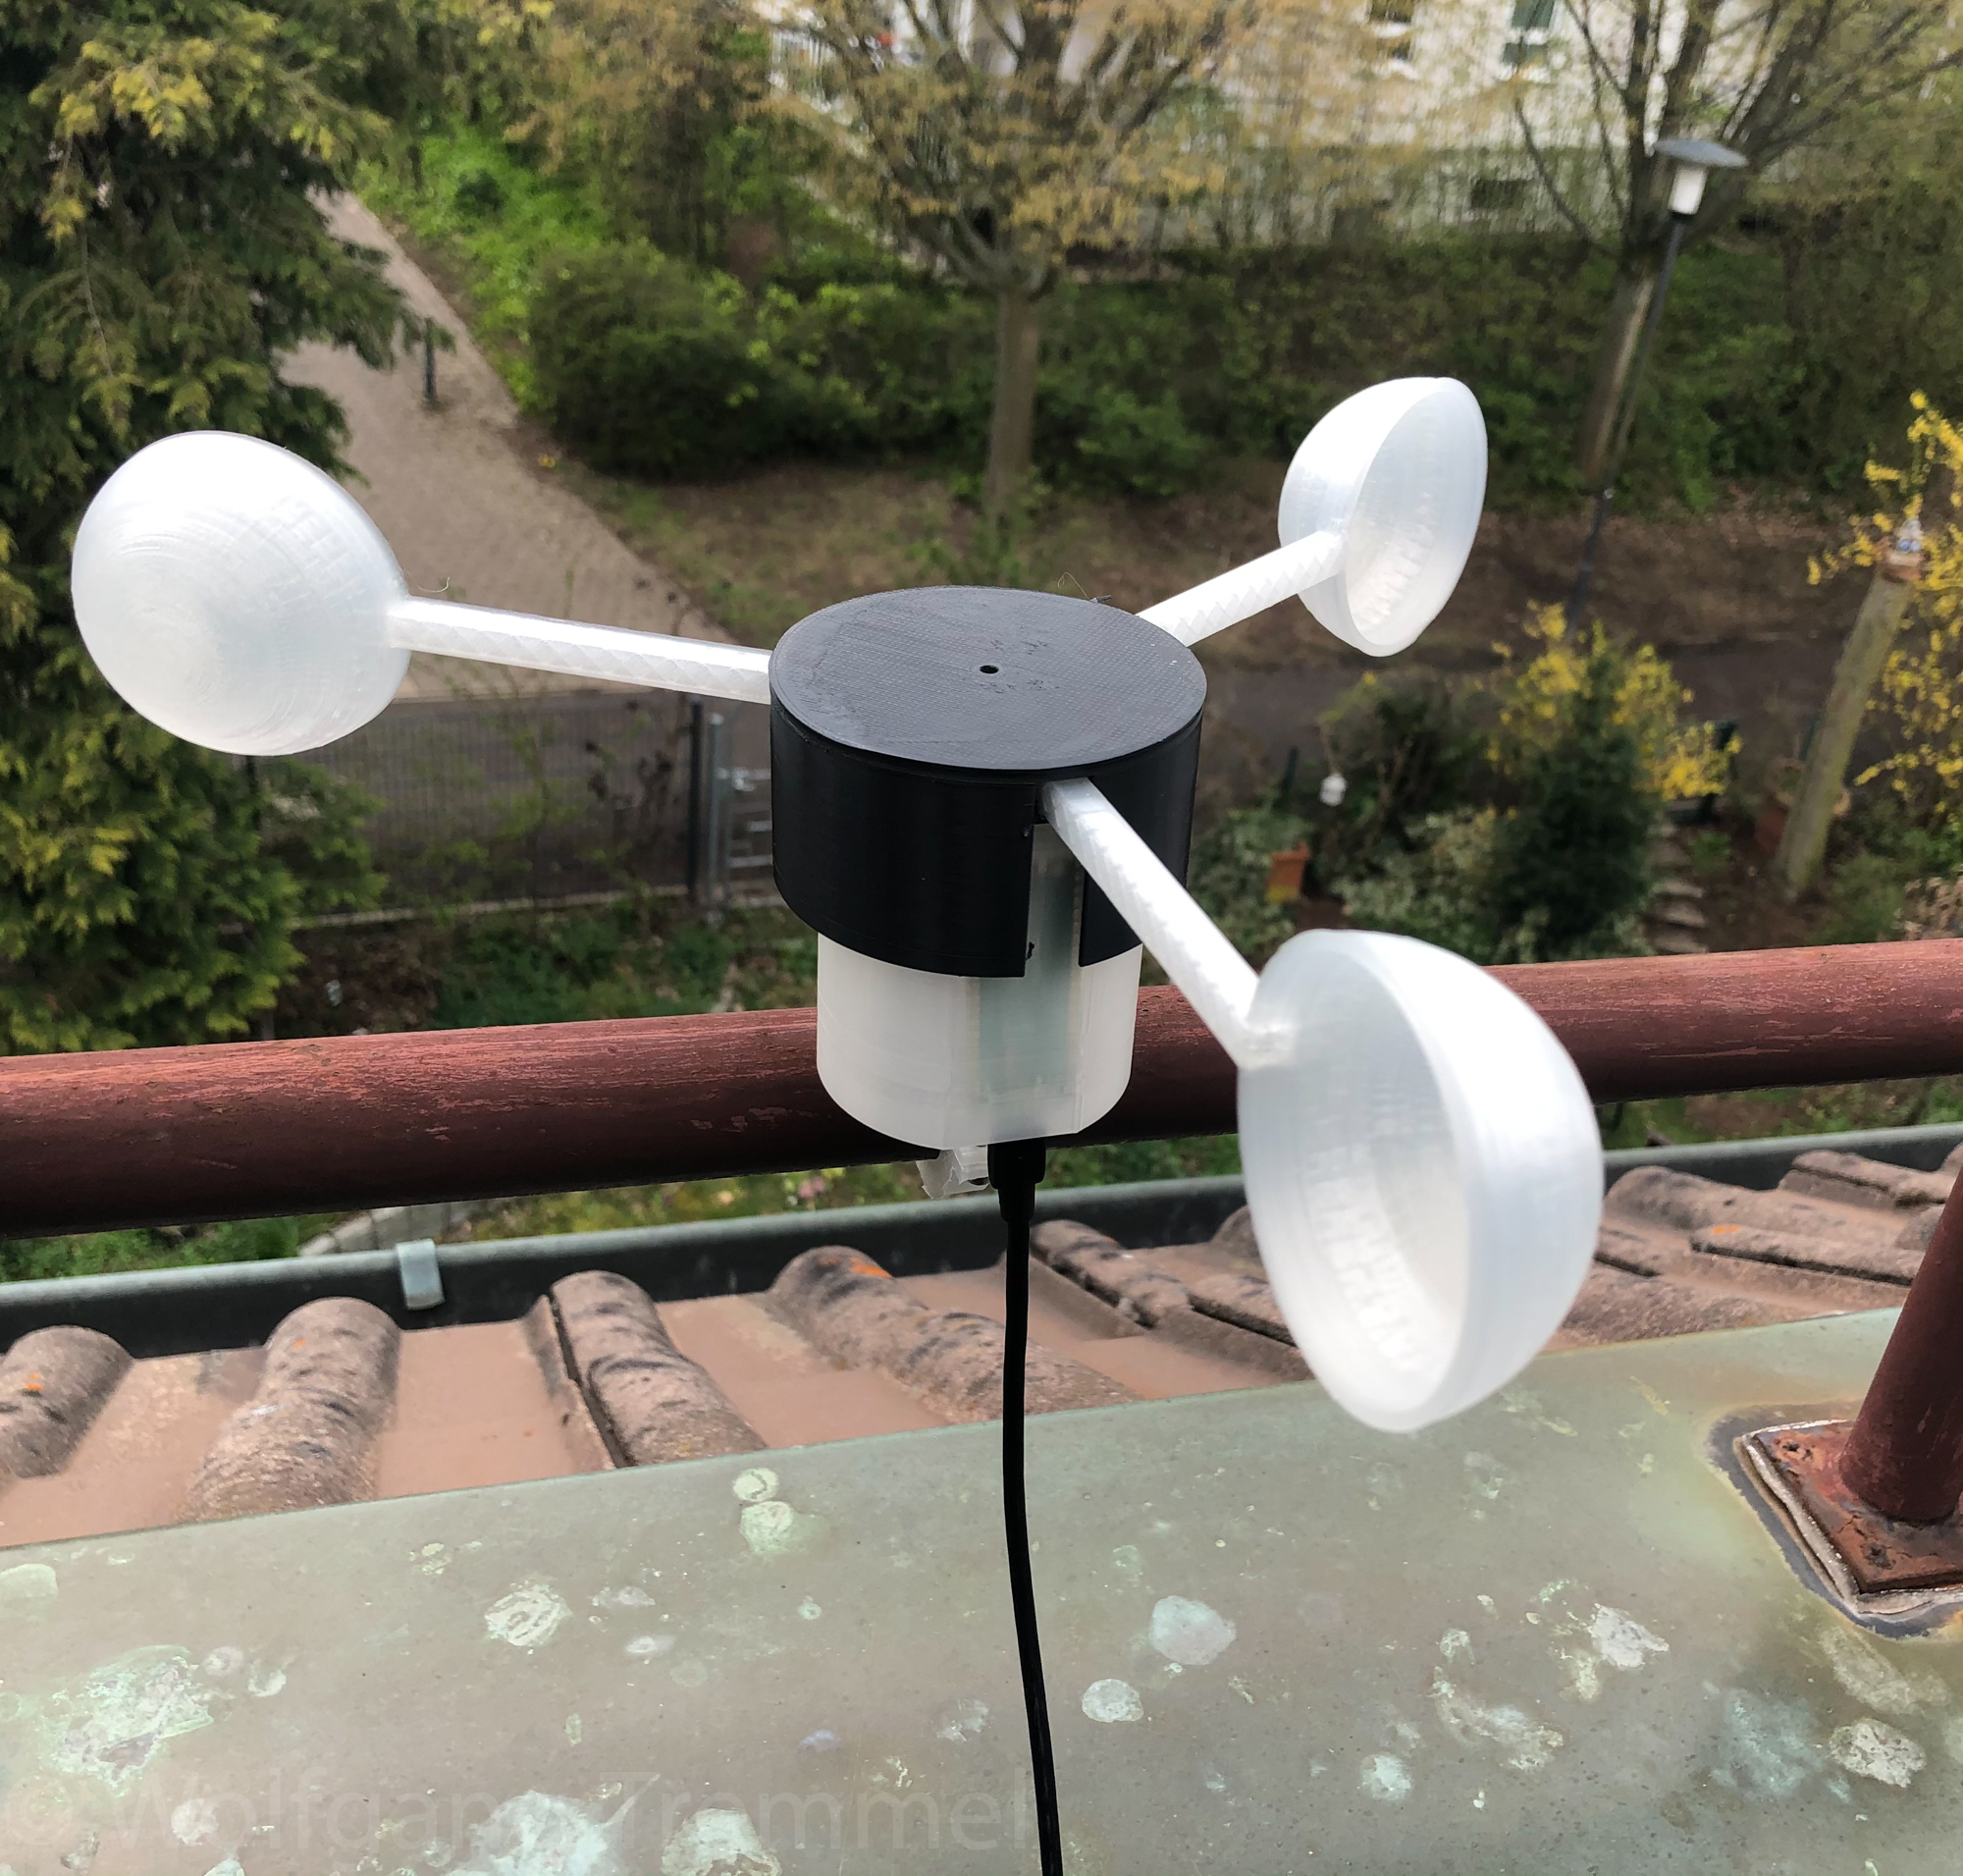 Building an Anemometer – Part 1